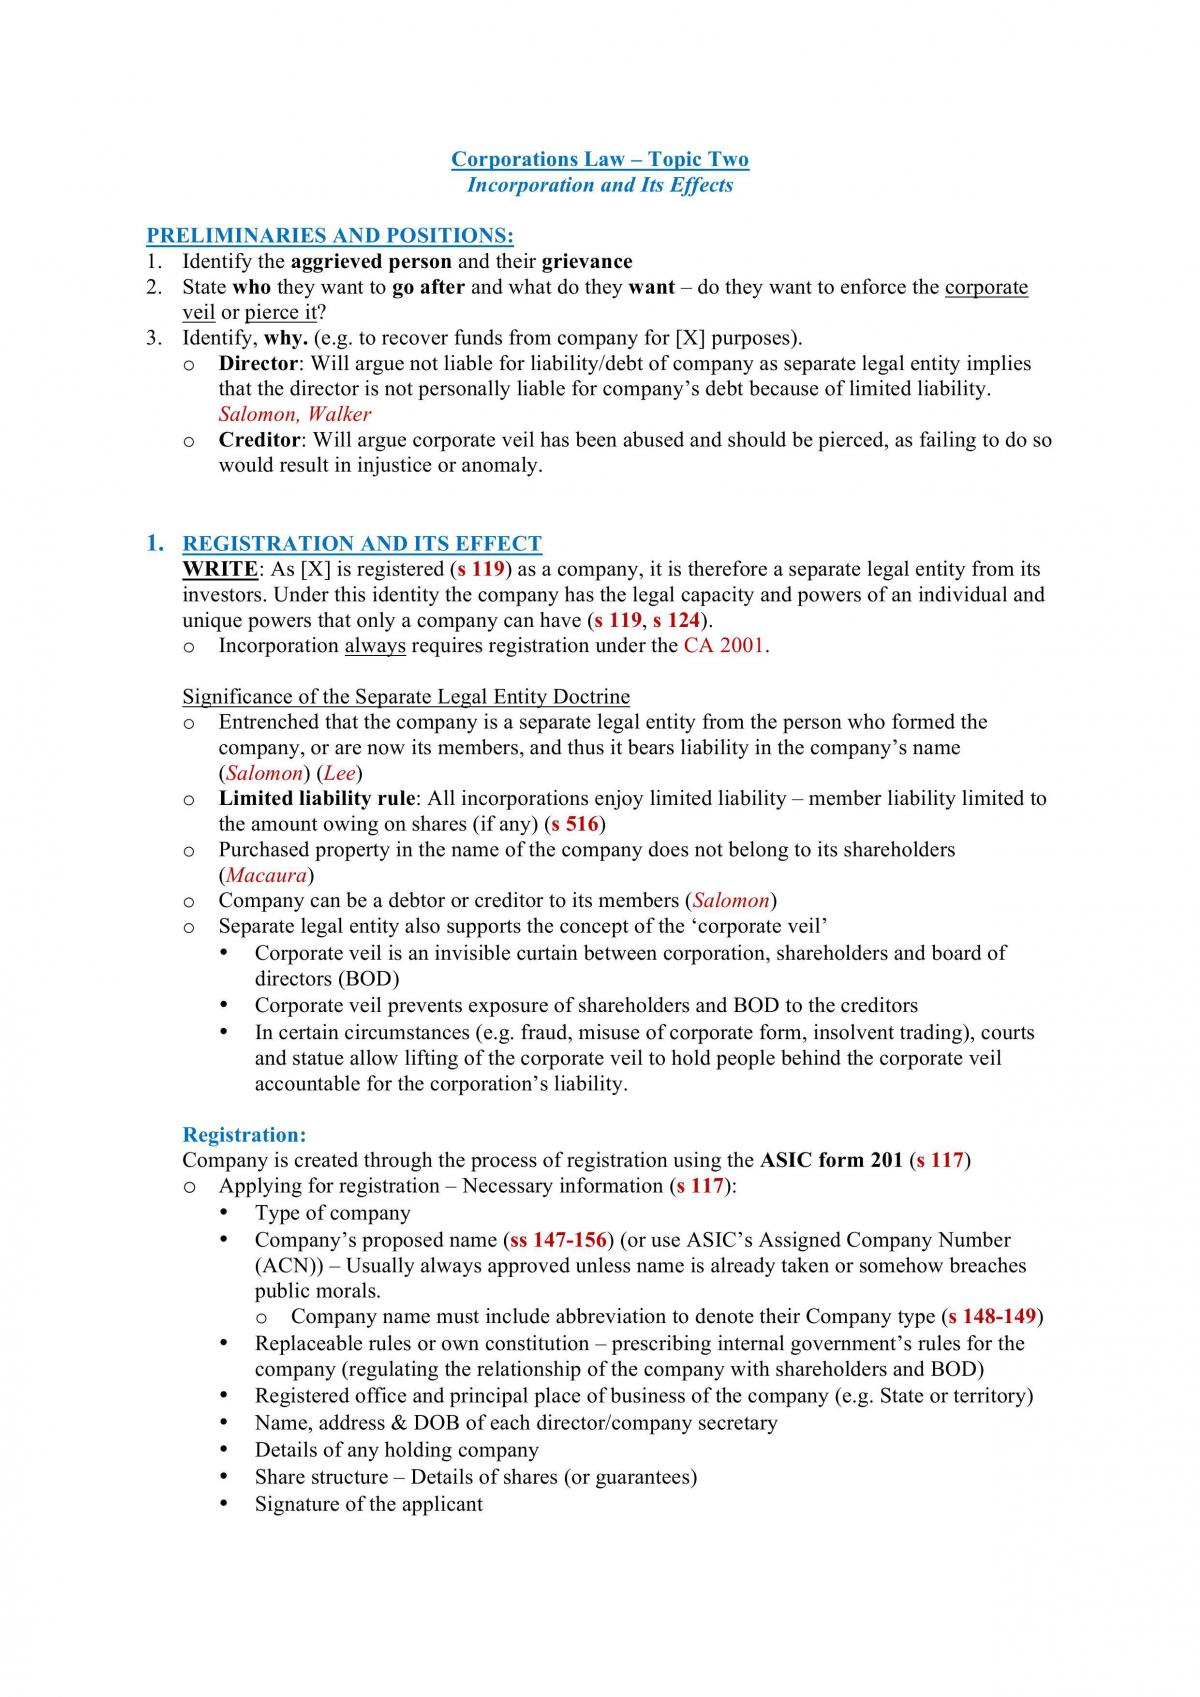 Corporations Law Exam Notes - Page 5